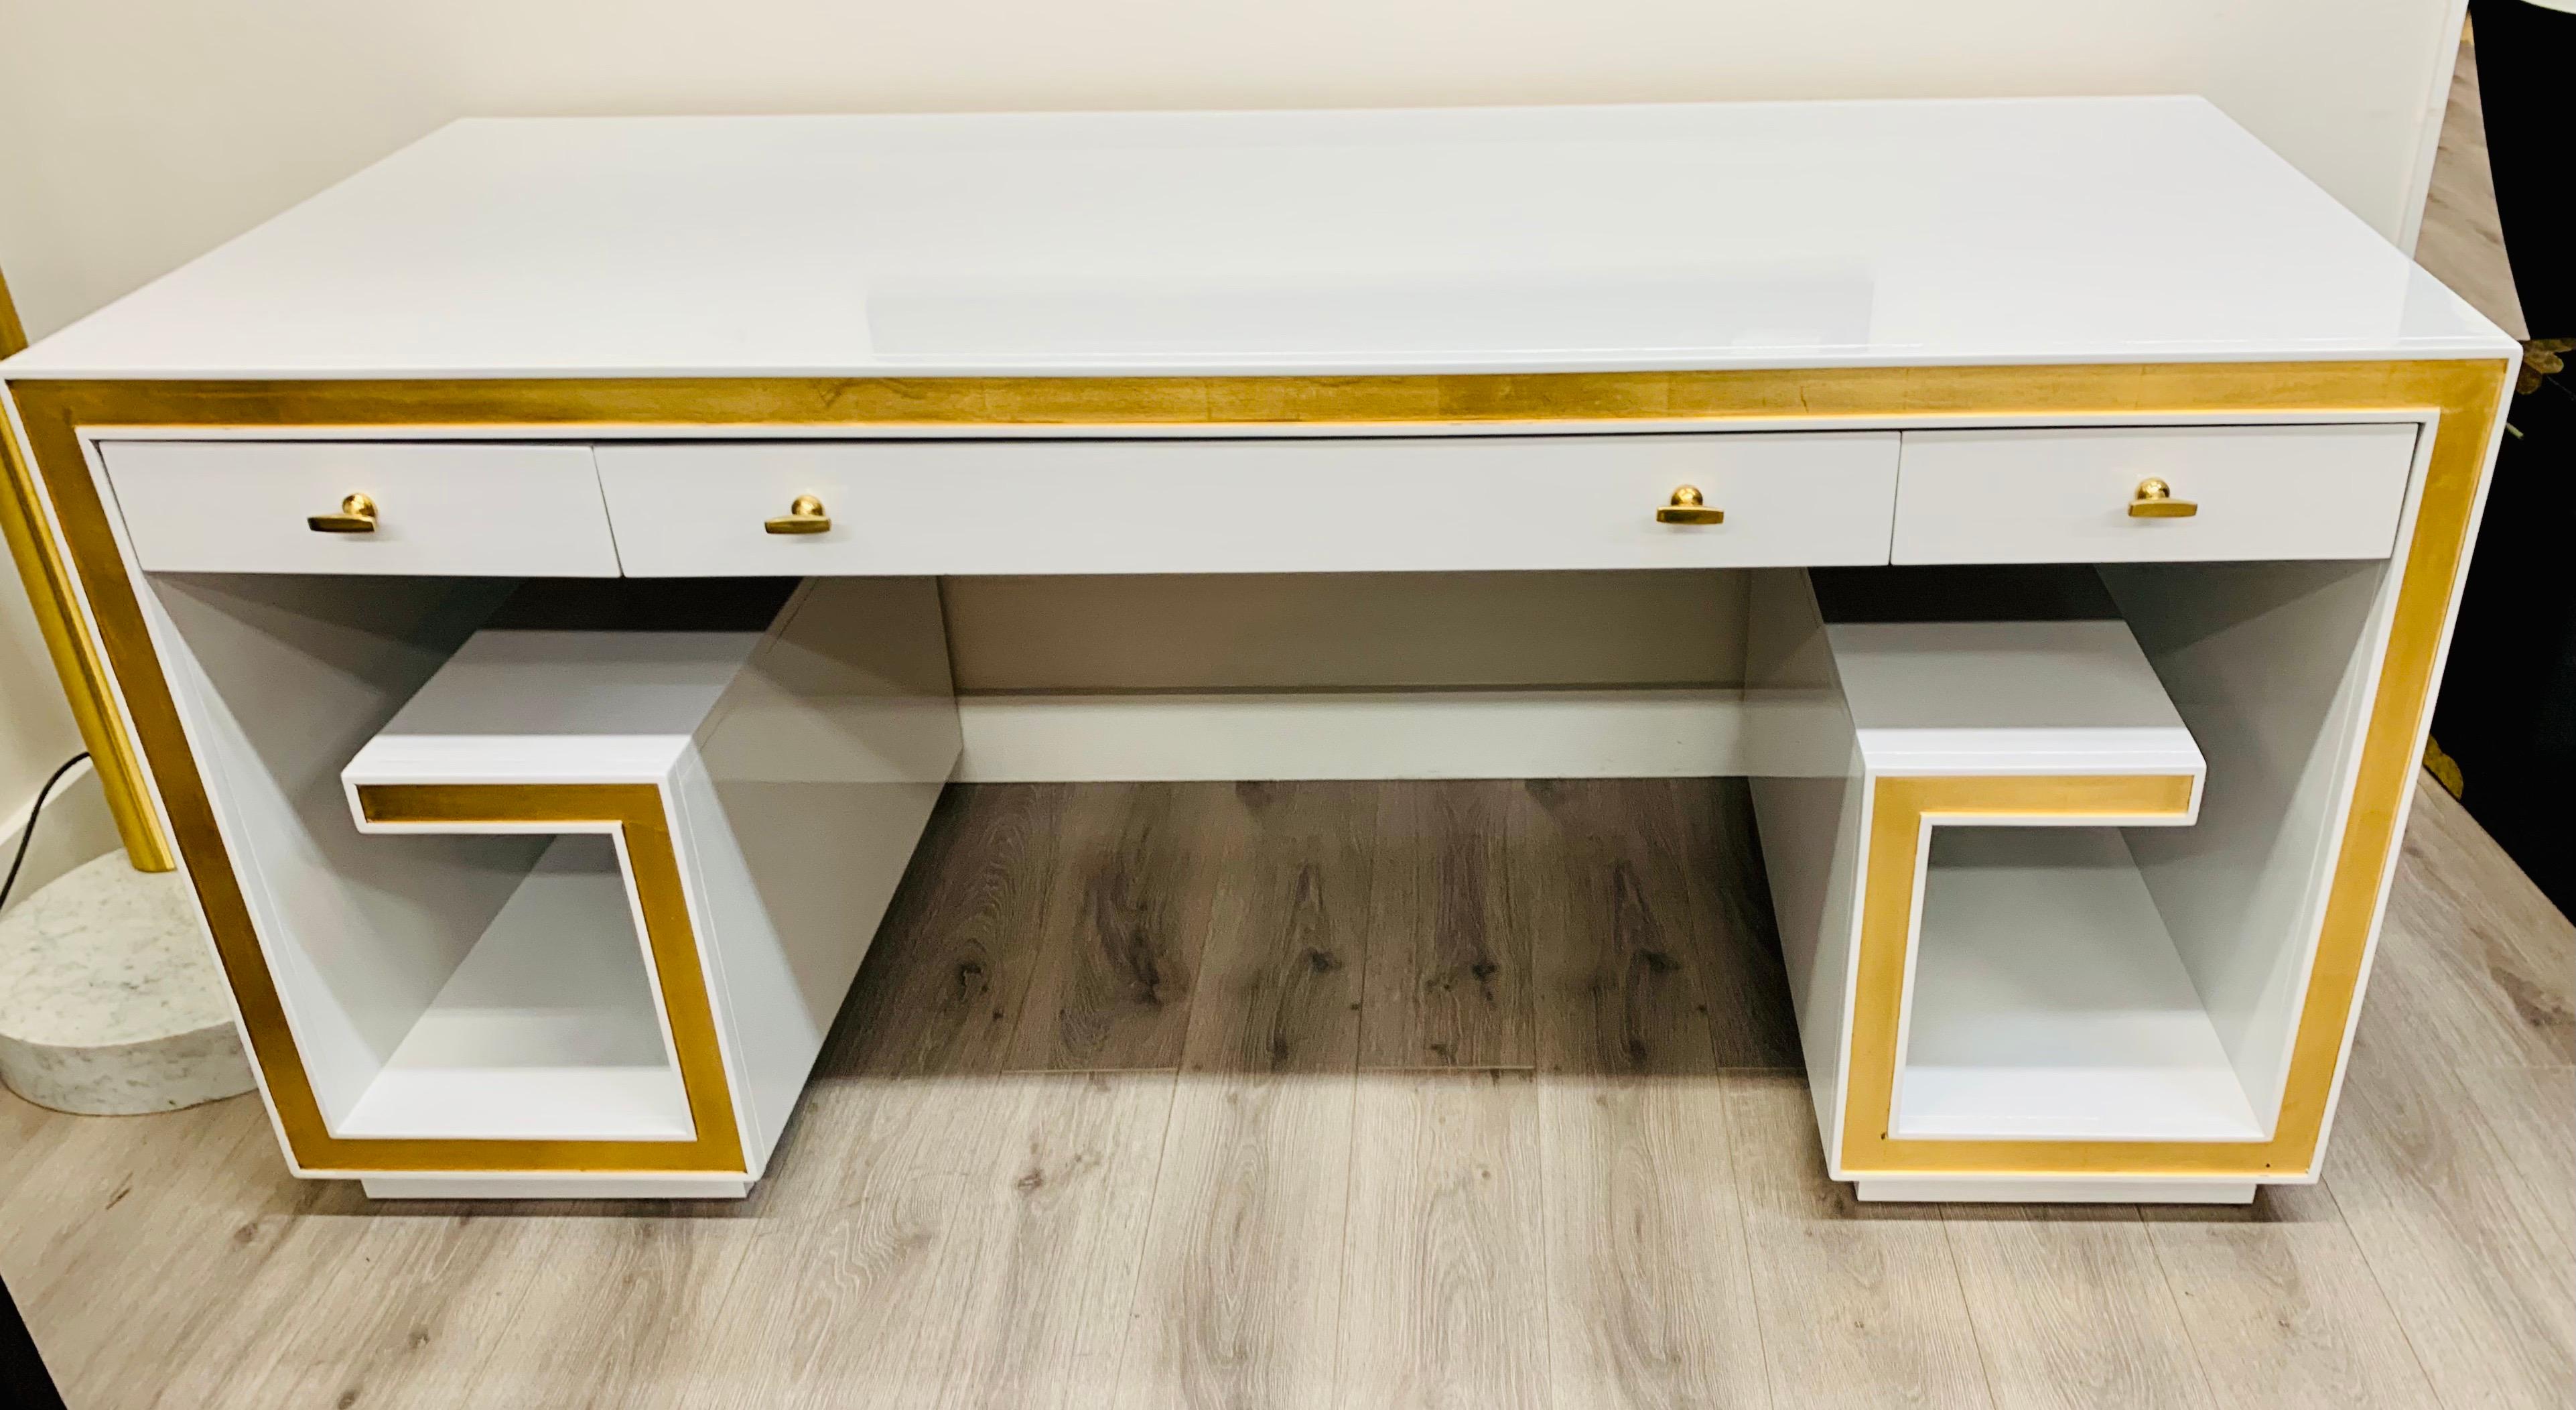 Beautiful three drawer writing desk has been newly lacquered in white with painted gold trim. New brass hardware. Dropfront keyboard drawer in center.